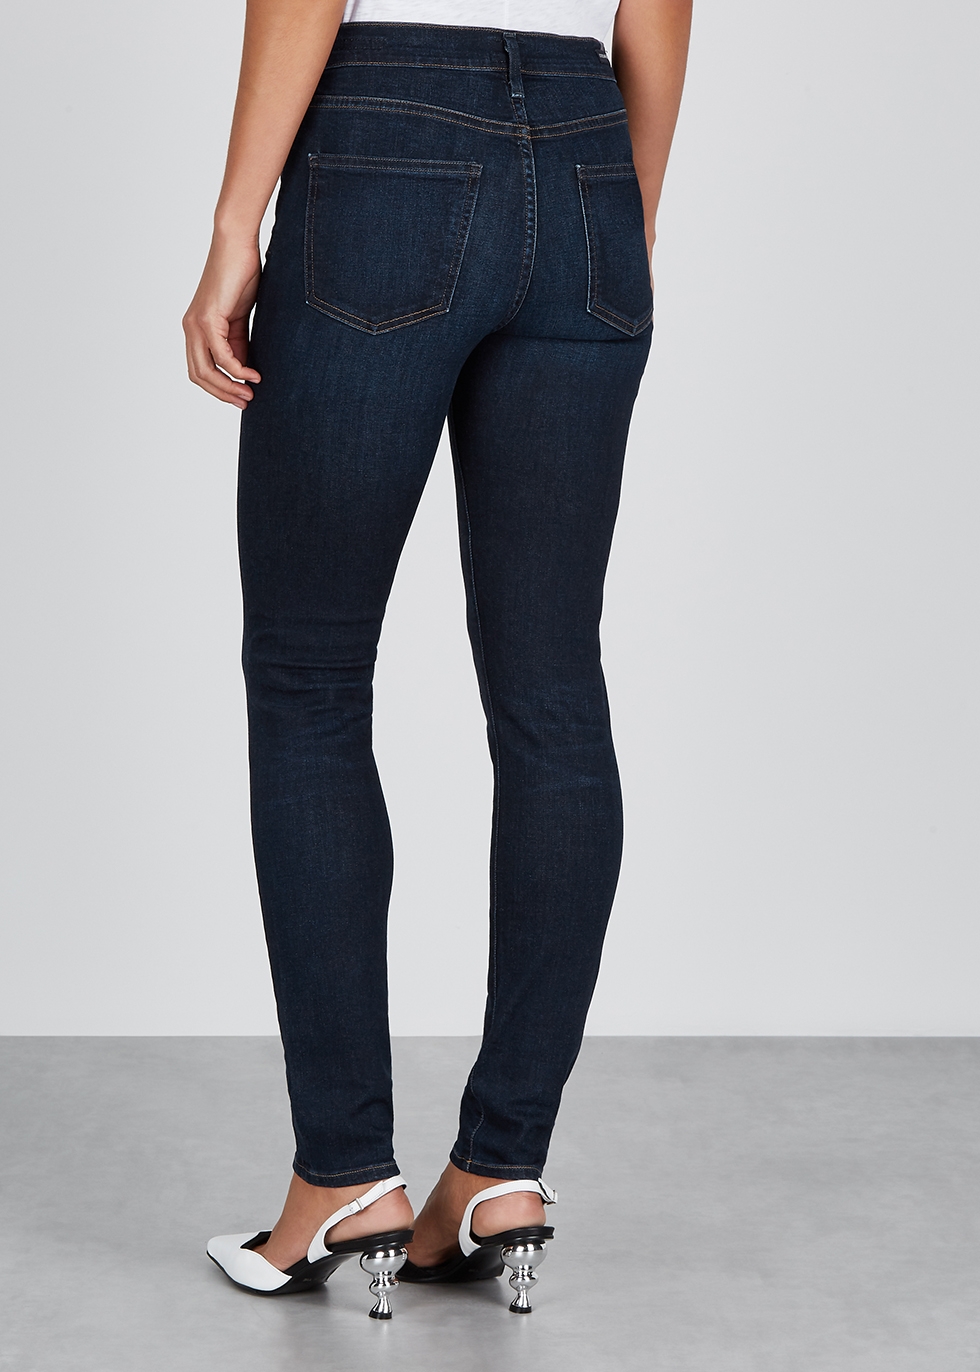 citizens of humanity rocket jean